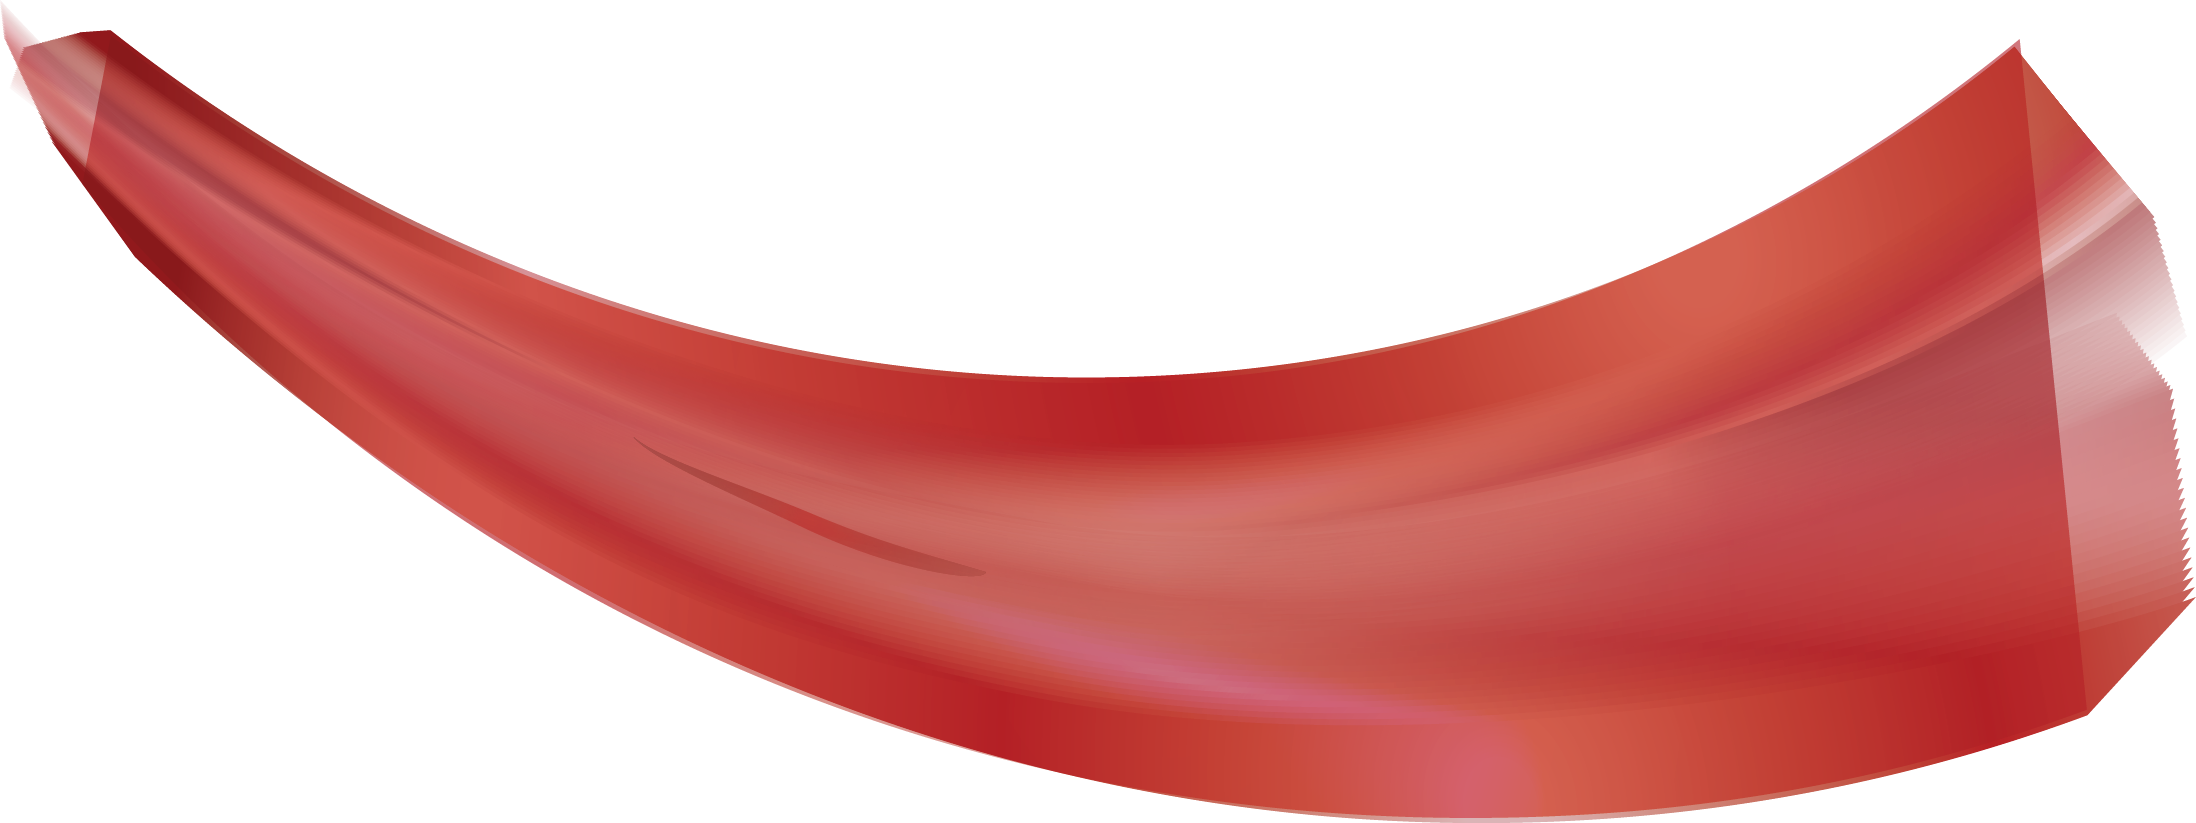 Picture Red Wave Free Clipart HQ PNG Image